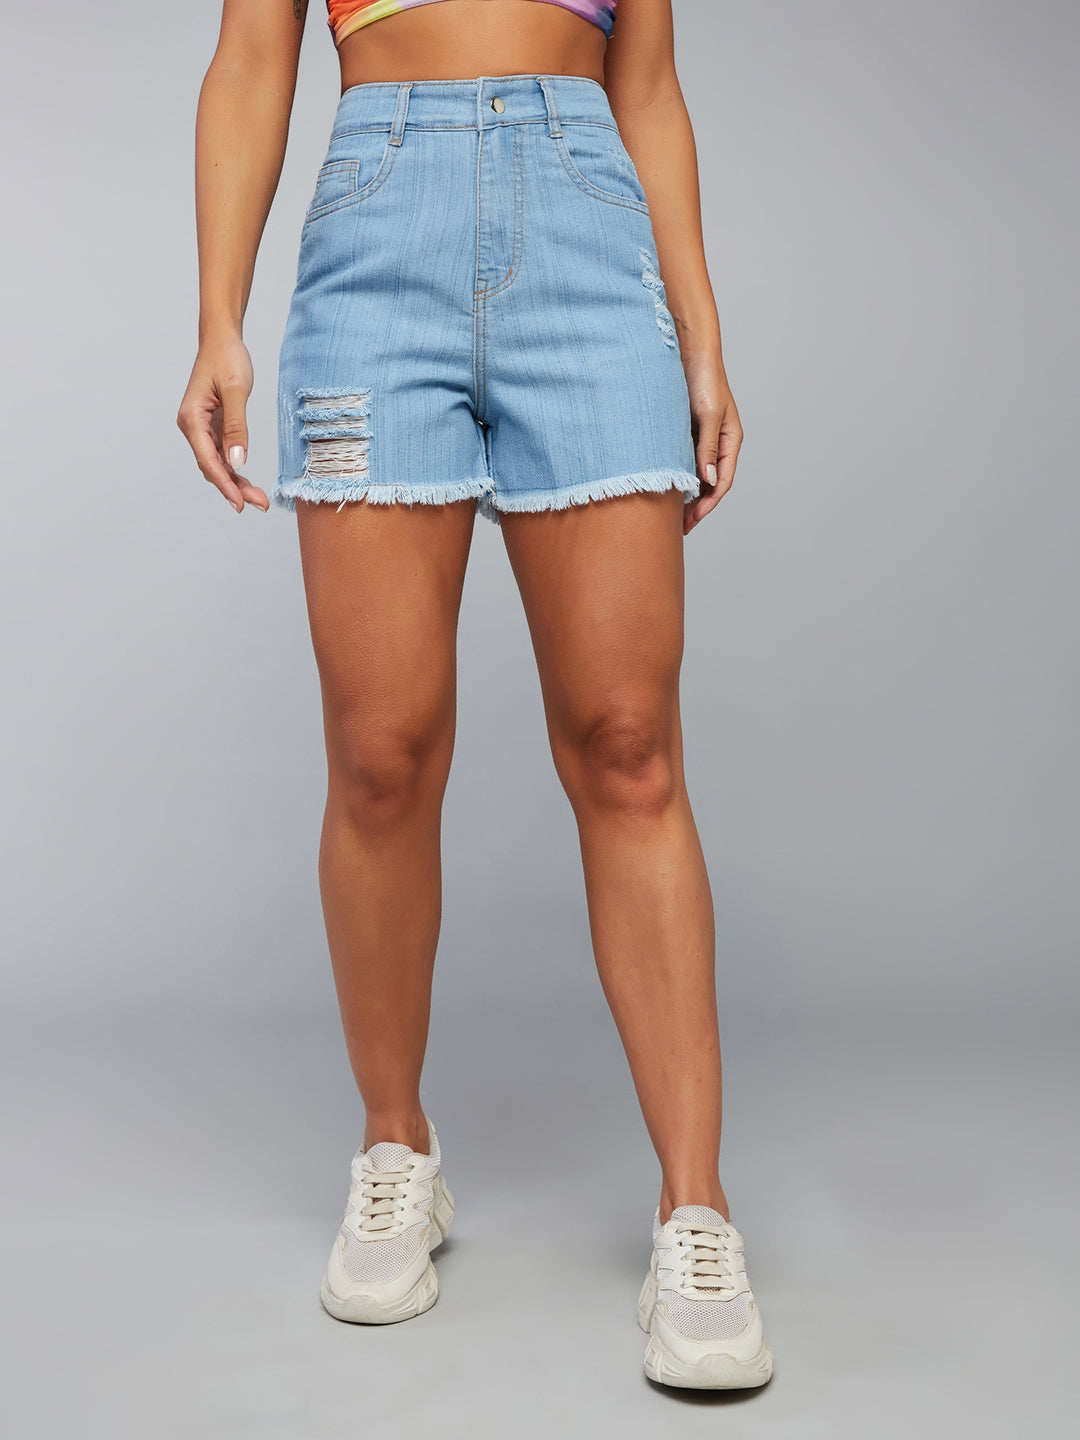 Women's Blue Relaxed Fit Mid Rise Highly Distressed Regular Length Denim Shorts